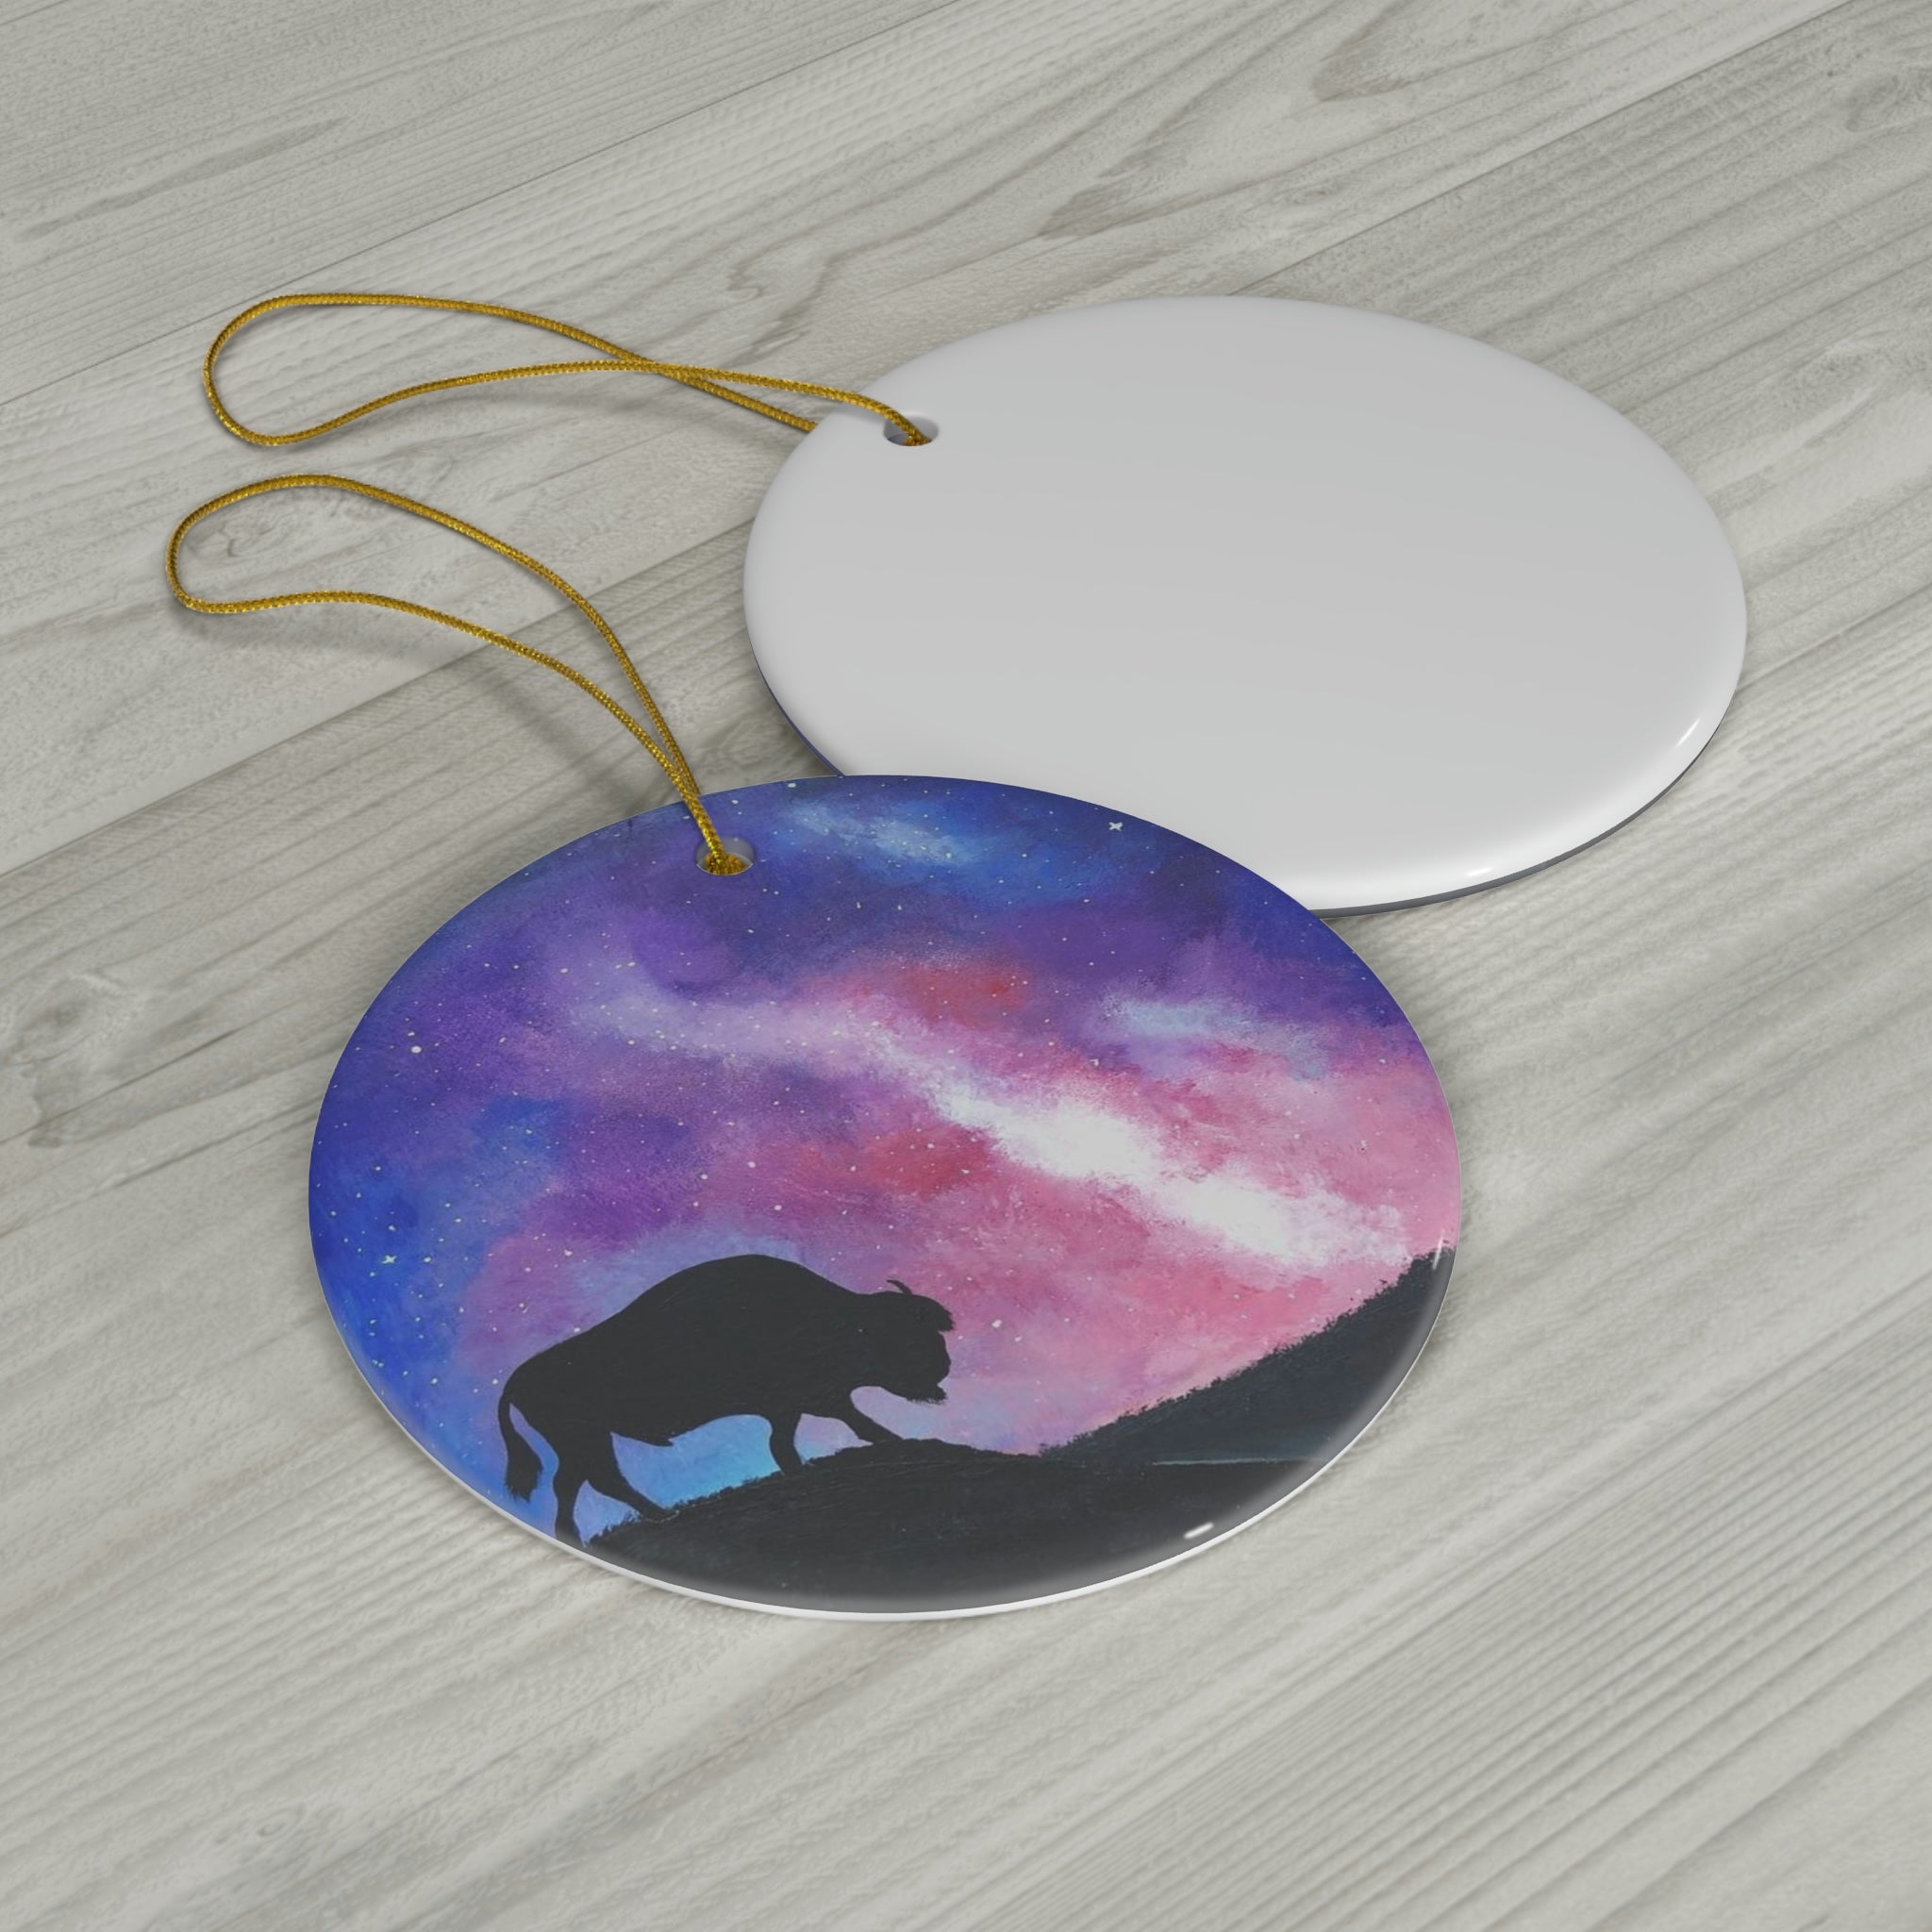 bison ceramic ornament with a galaxy night sky